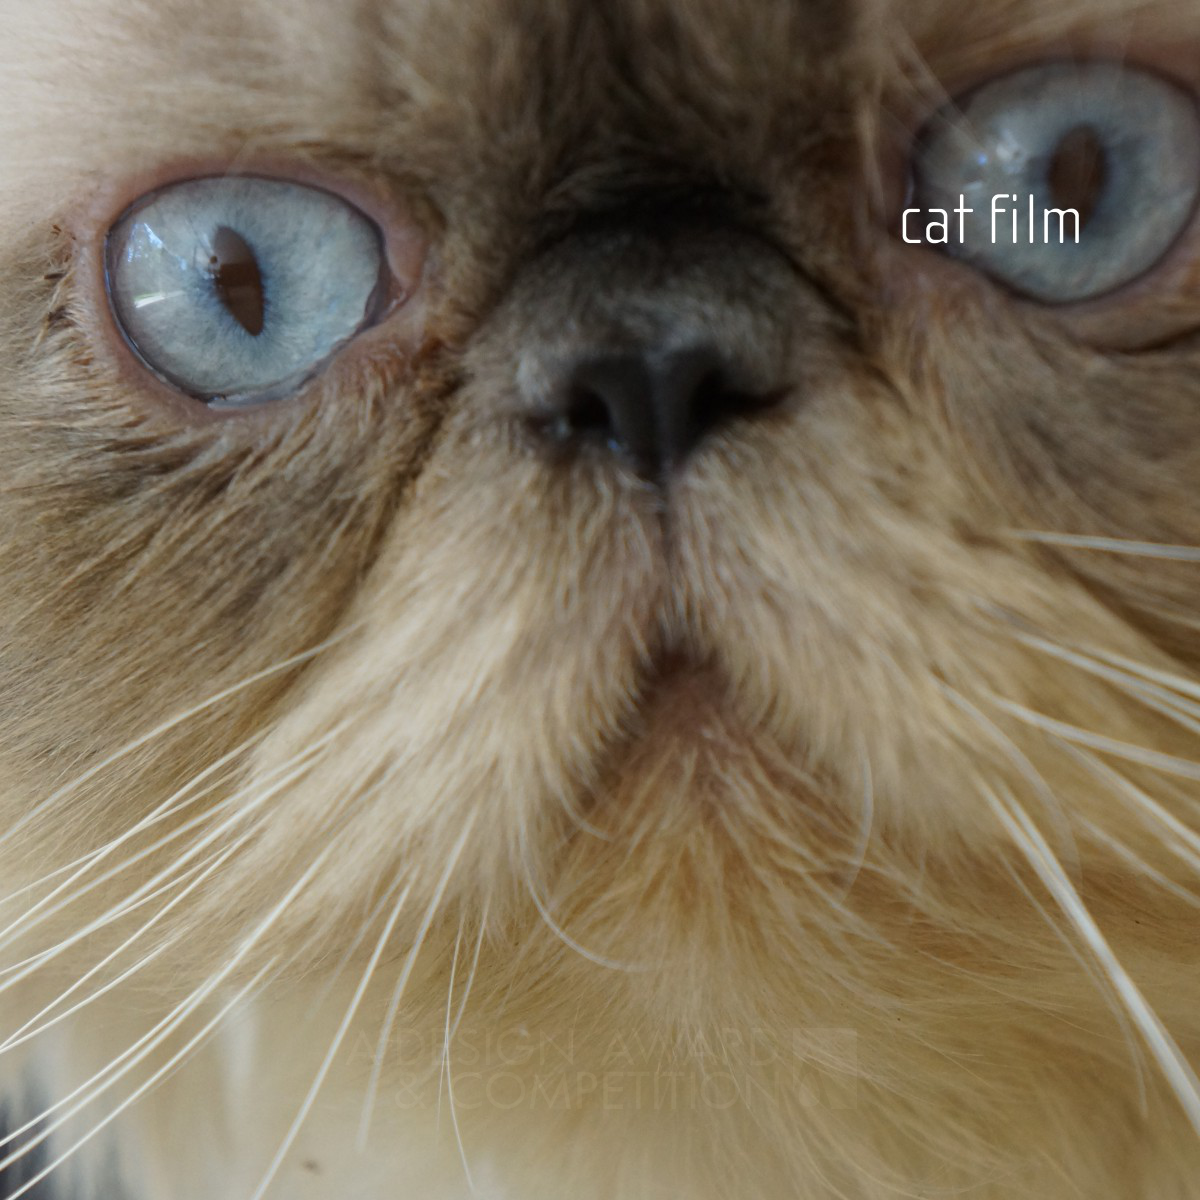 Cat Film to show architecture by studiomk27